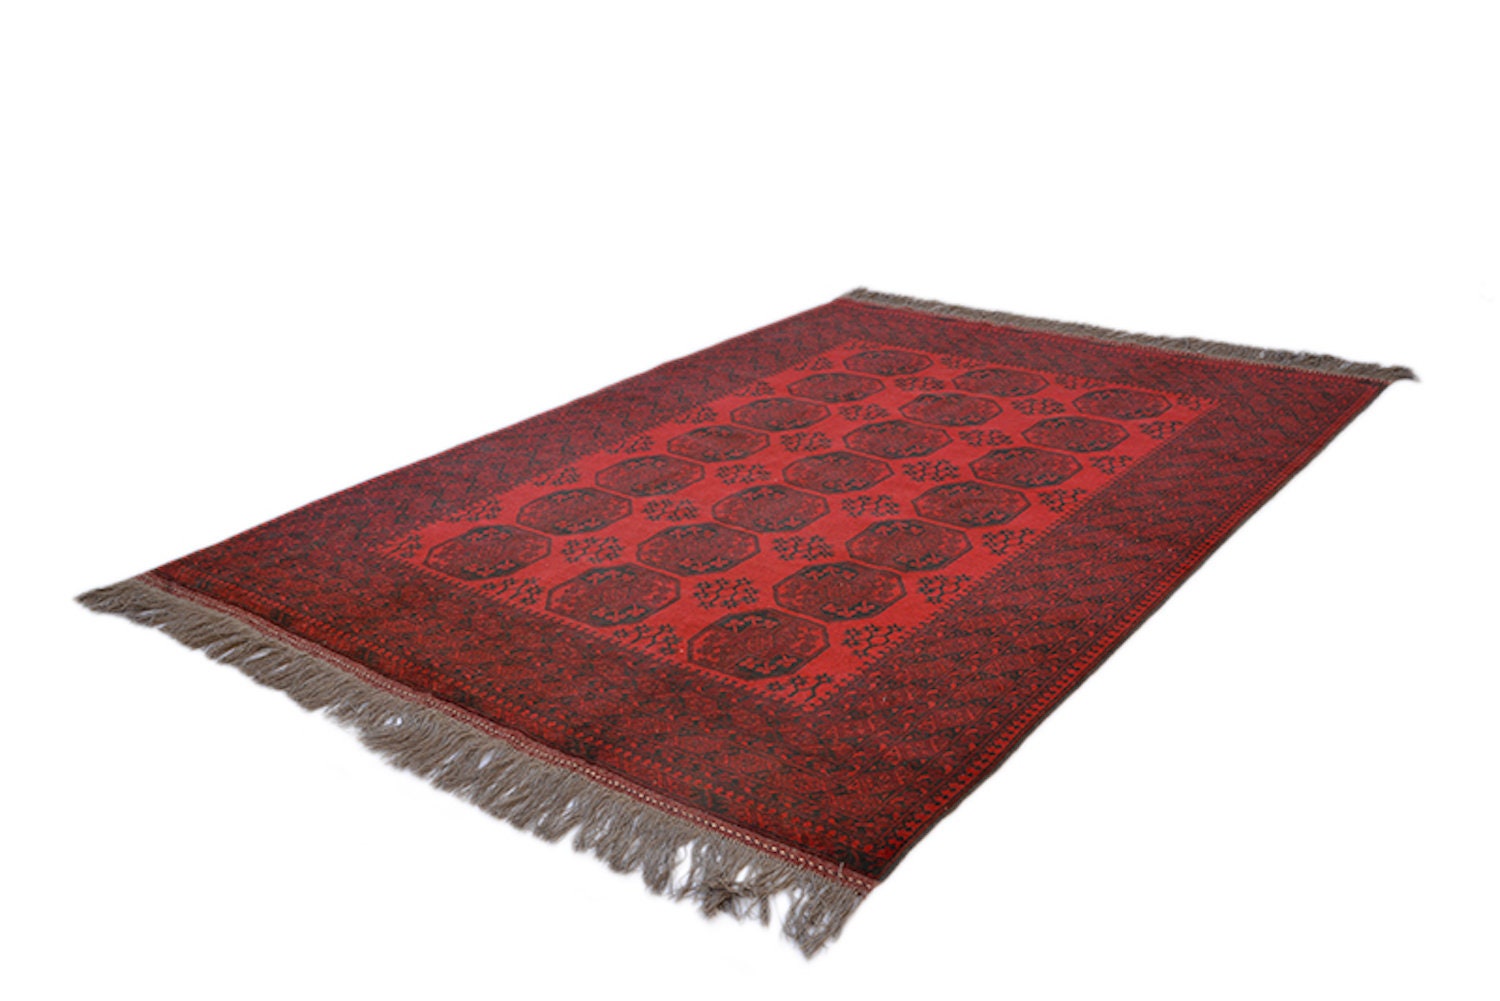 6x9 Red Oriental Low Pile Rug, Deep Bright Colored Afghan Caucasian, Antique Hand Knotted  with Wool